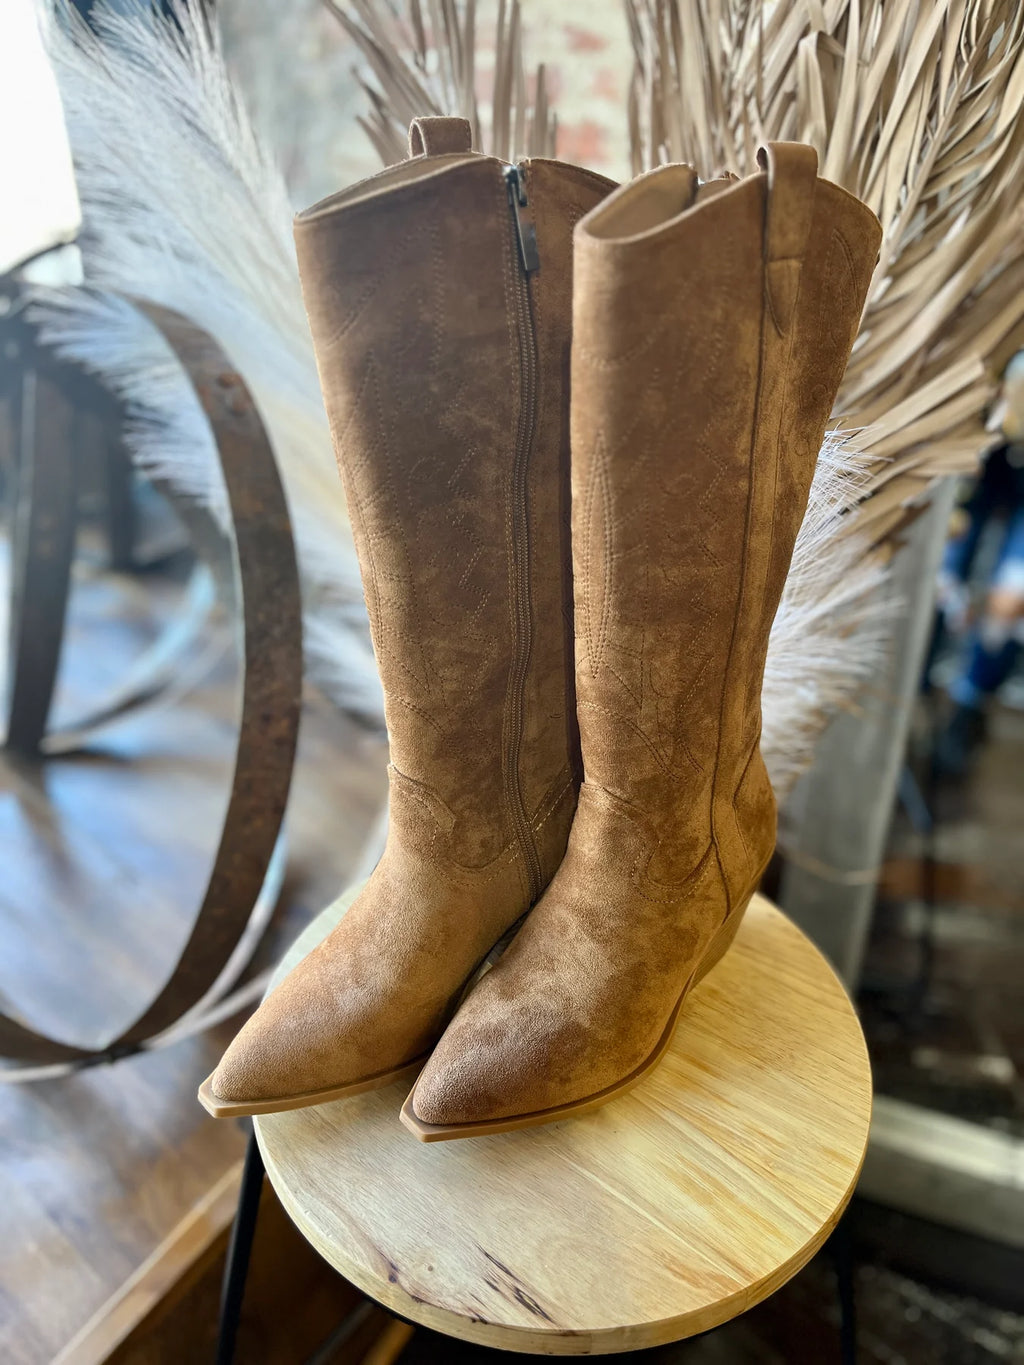 Cognac Howdy Boots by Corkys